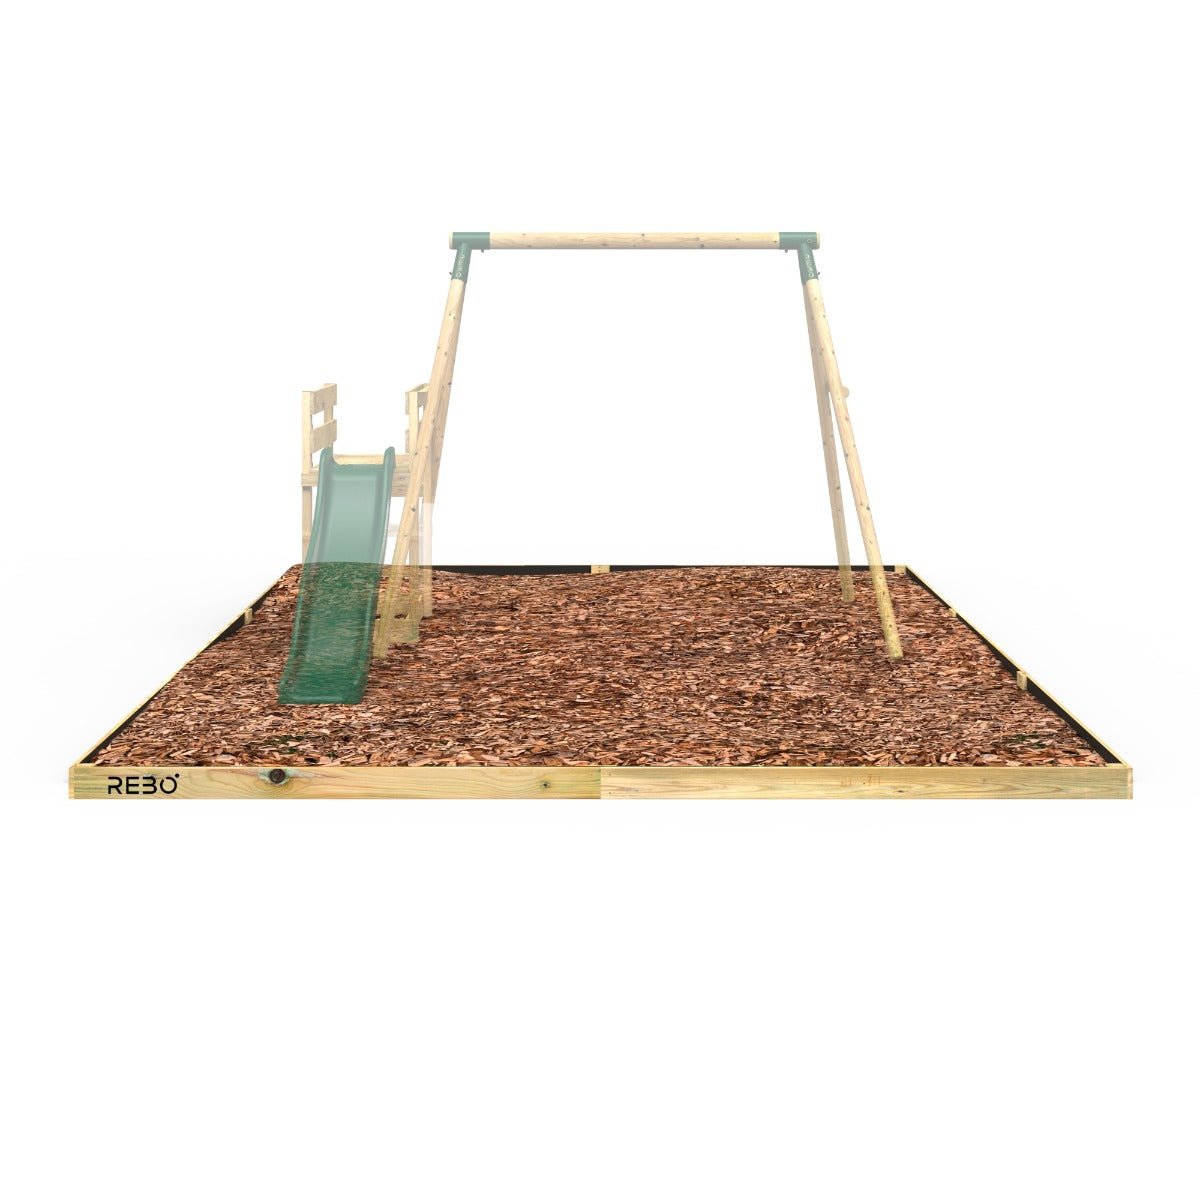 Rebo Safety Play Area Protective Bark Wood Chip Kit - 4M x 5.1M